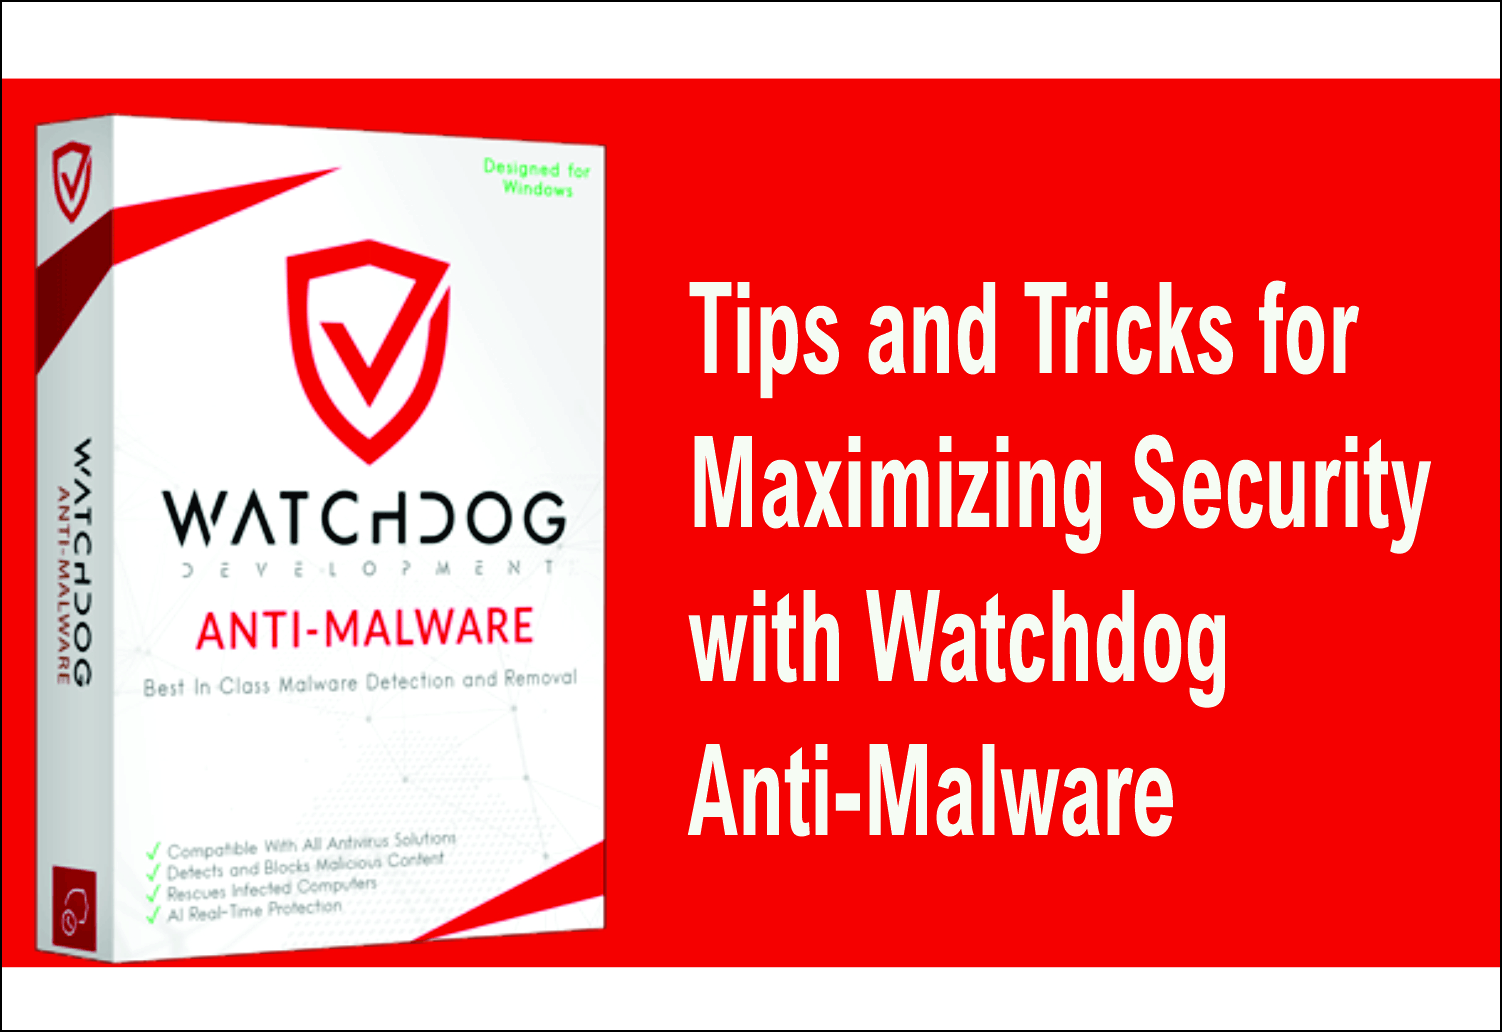 Tips and Tricks for Maximizing Security with Watchdog Anti-Malware